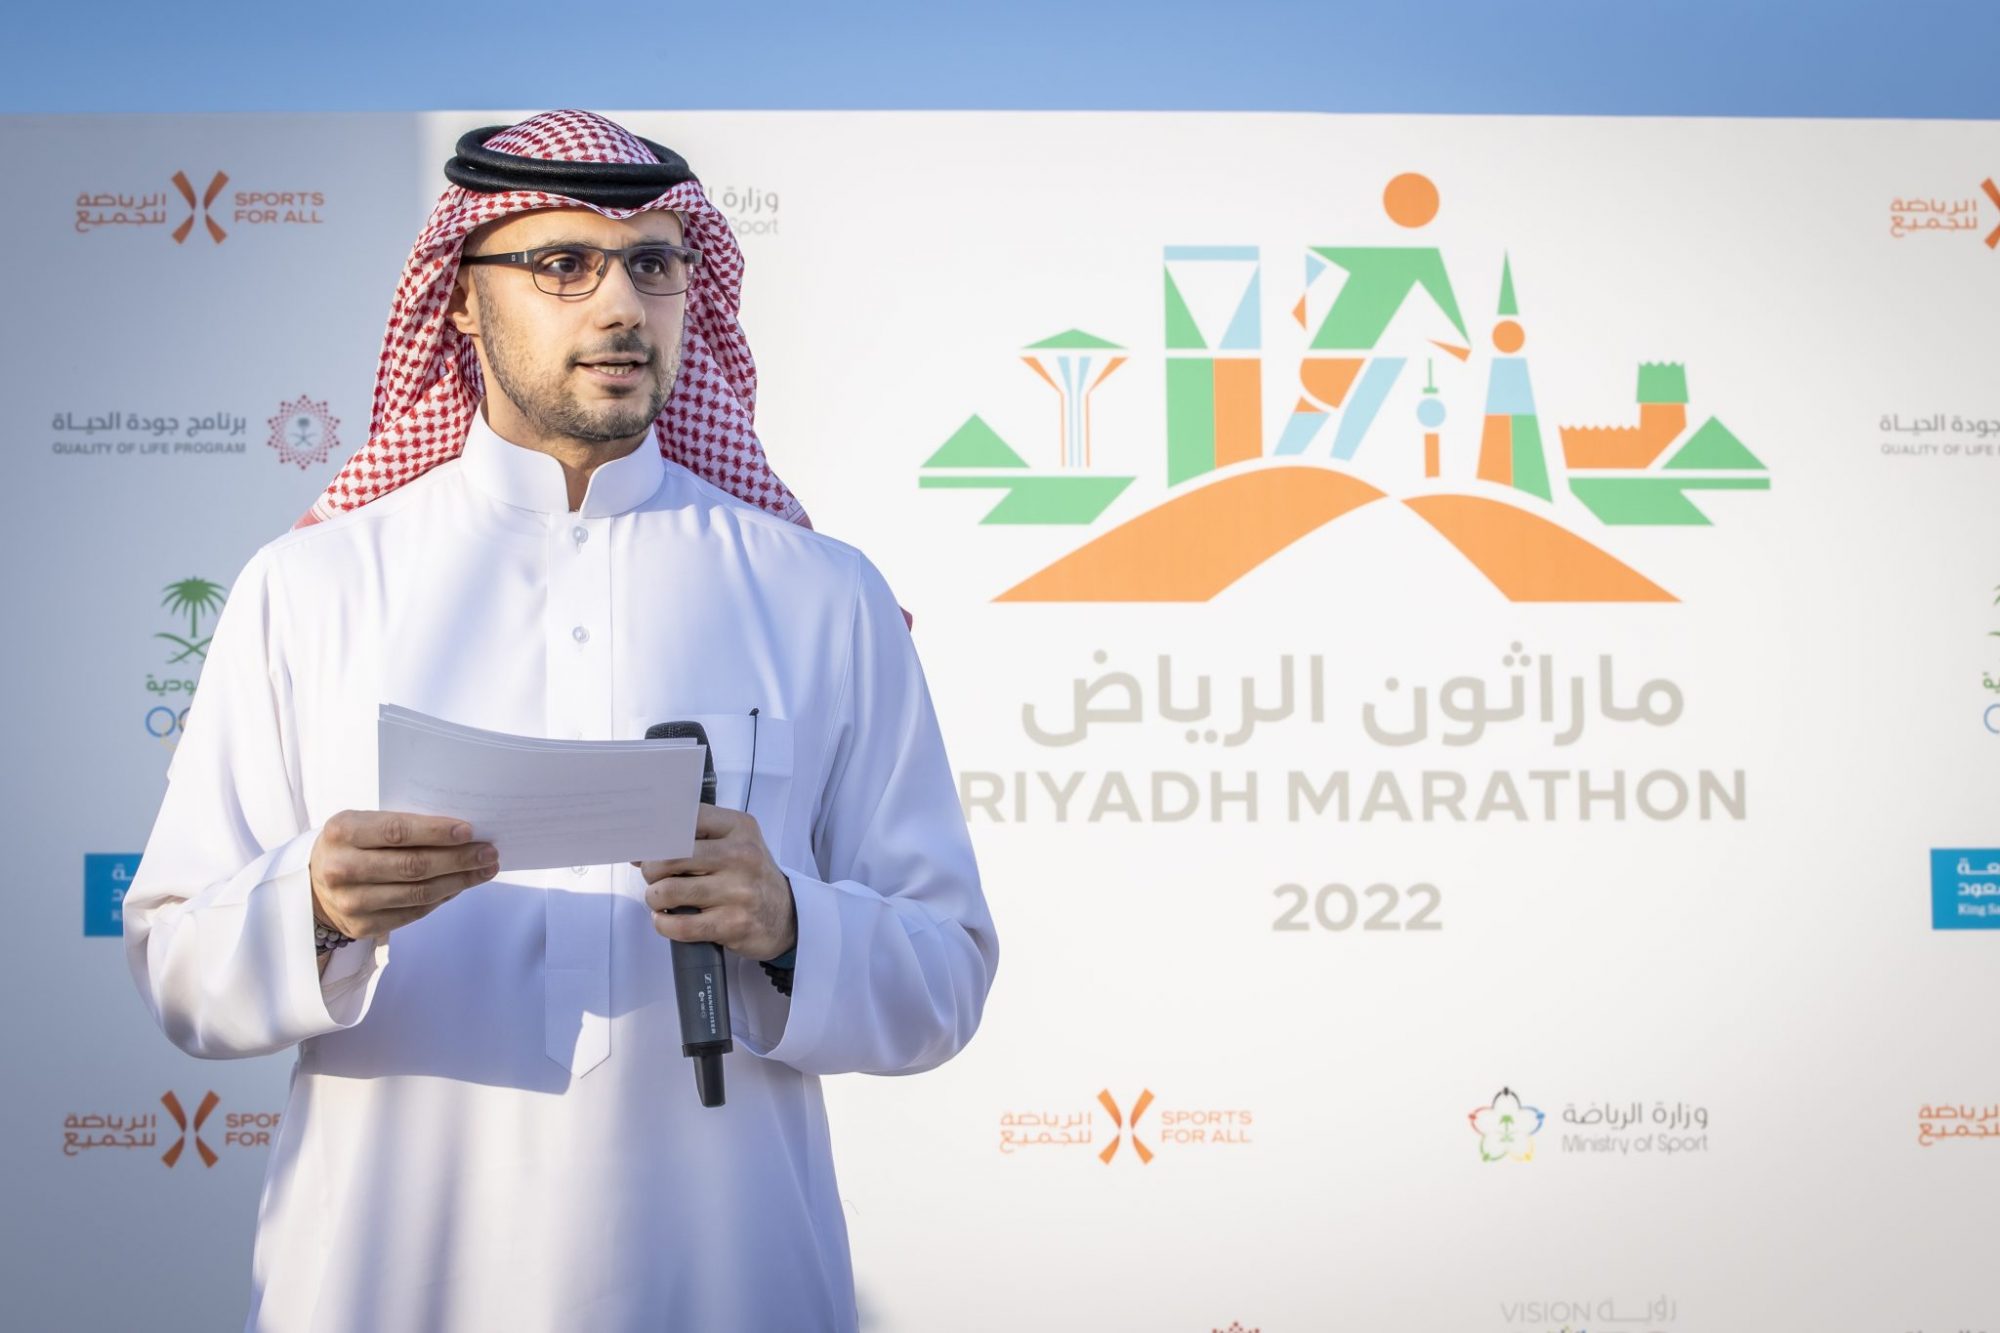 Saudi Arabia Announces First Full Marathon In The Kingdom Staged By The